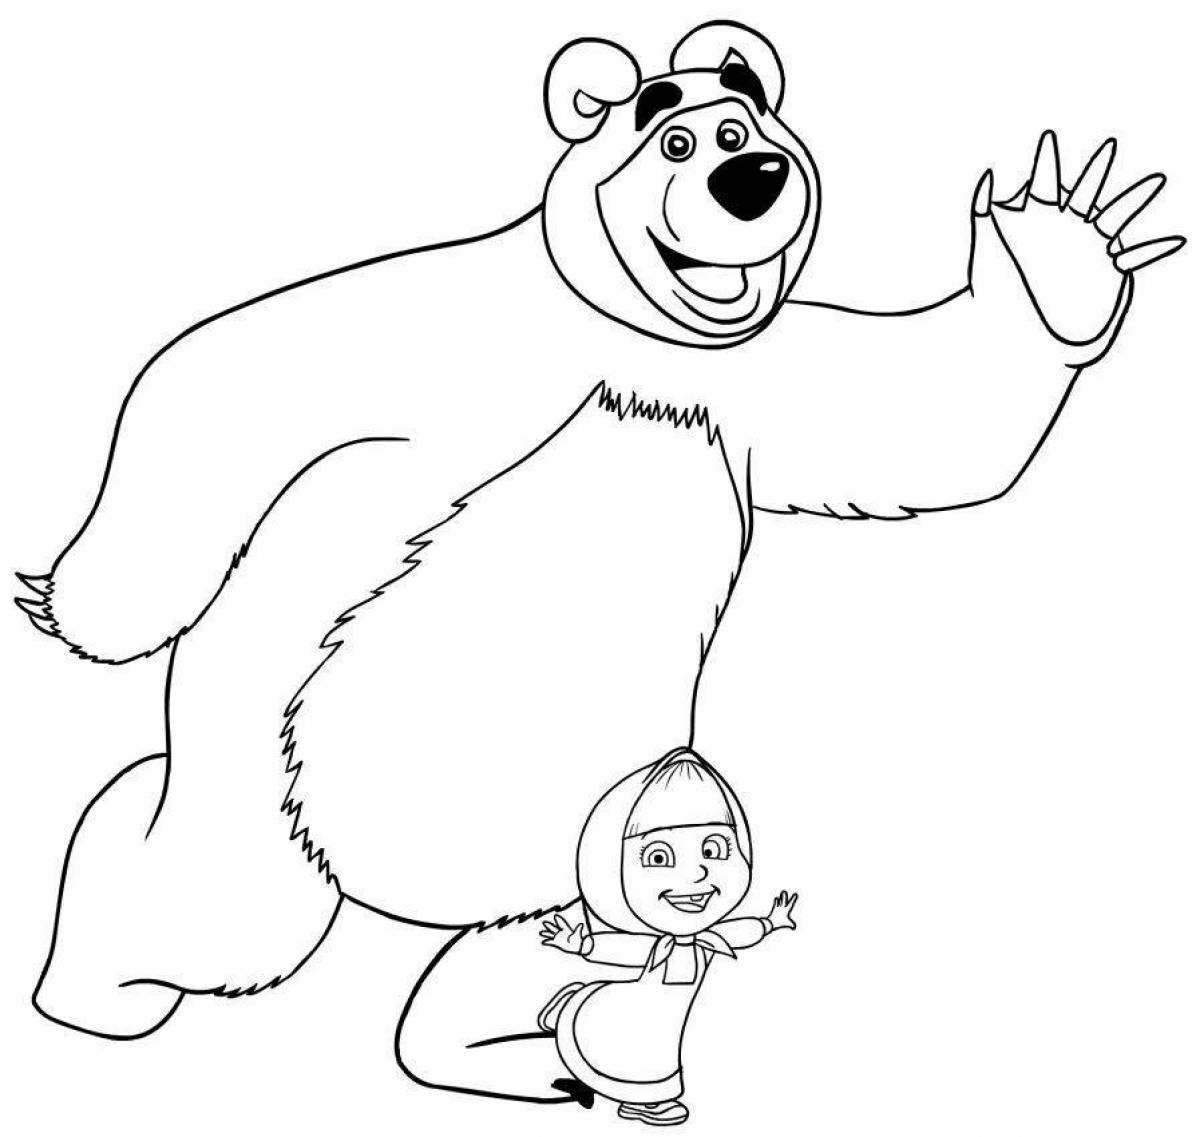 Clear the coloring page masha and the bear